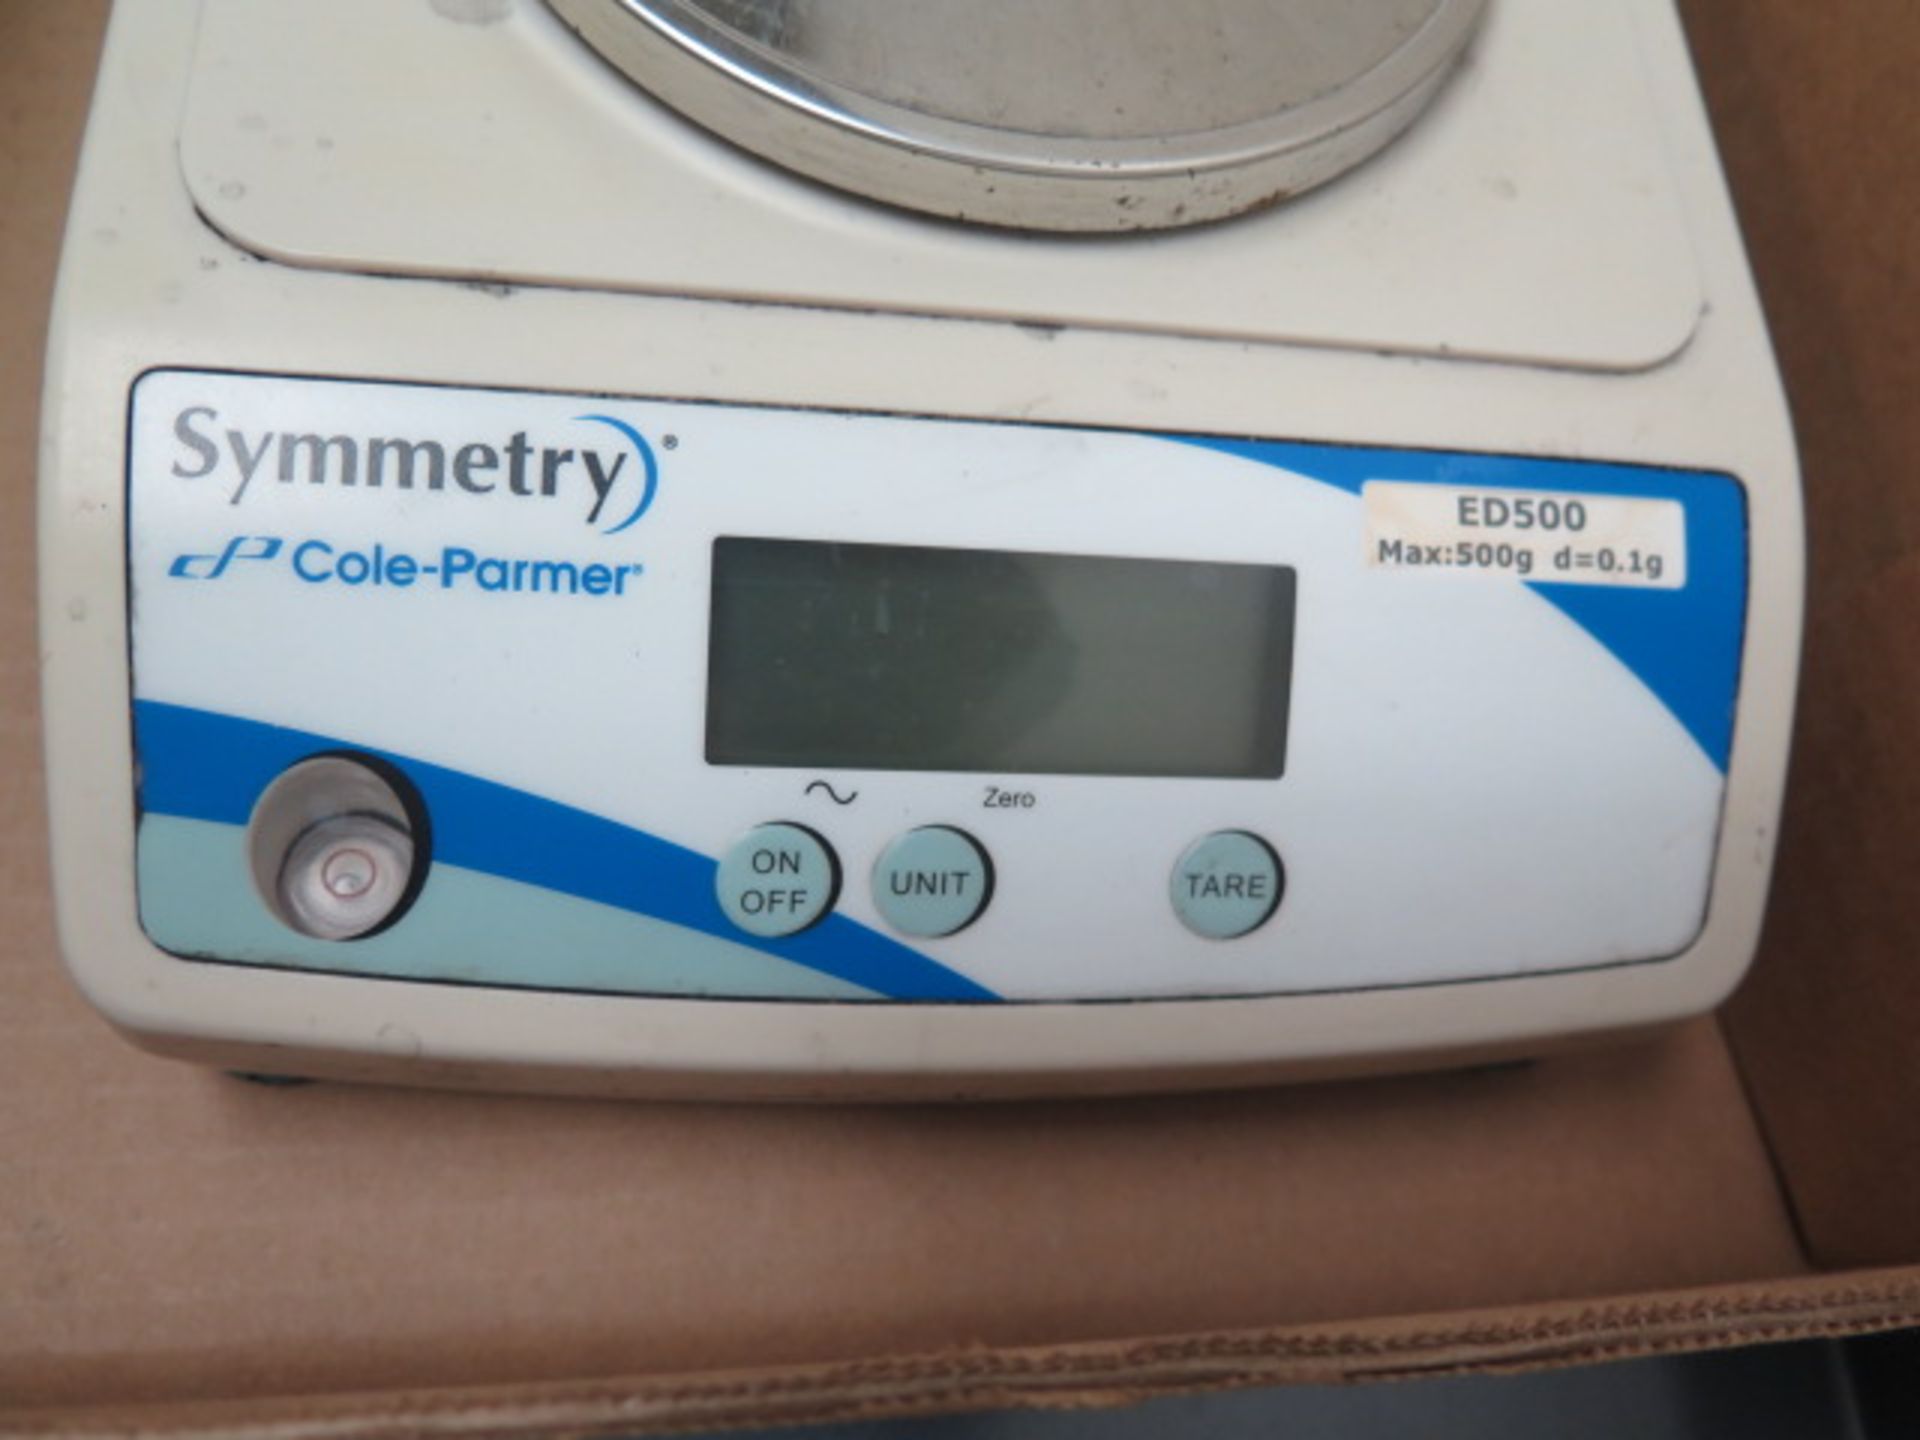 Cole-Parmer Symmetry ED500 500g Digital Scale to 0.1g - Image 3 of 3